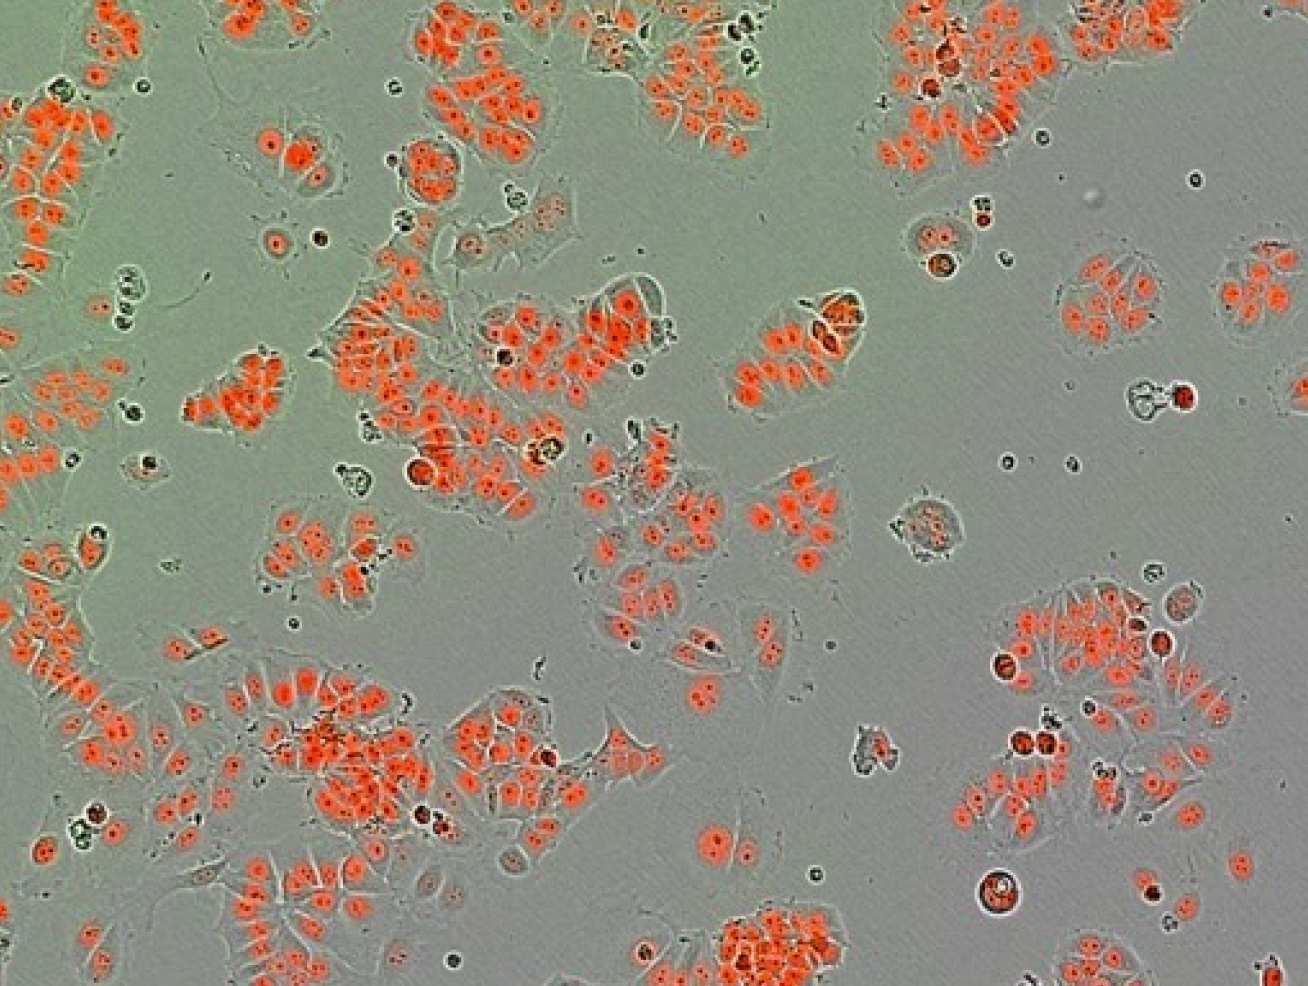 Human breast cancer cells (nucleus shown in red)